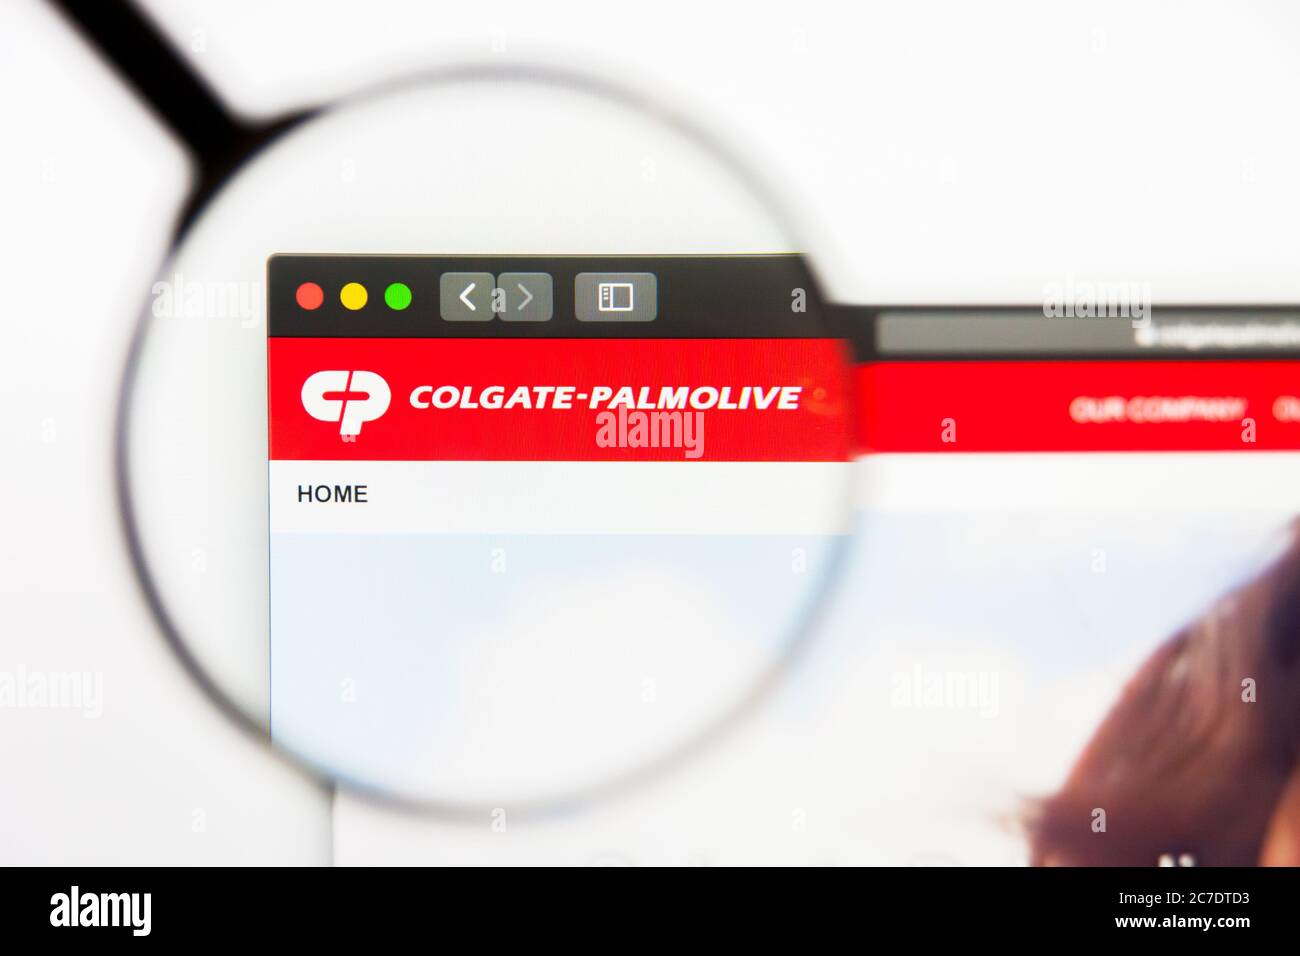 Los Angeles, California, USA - 13 March 2019: Illustrative Editorial, Colgate-Palmolive website homepage. Colgate-Palmolive logo visible on display Stock Photo